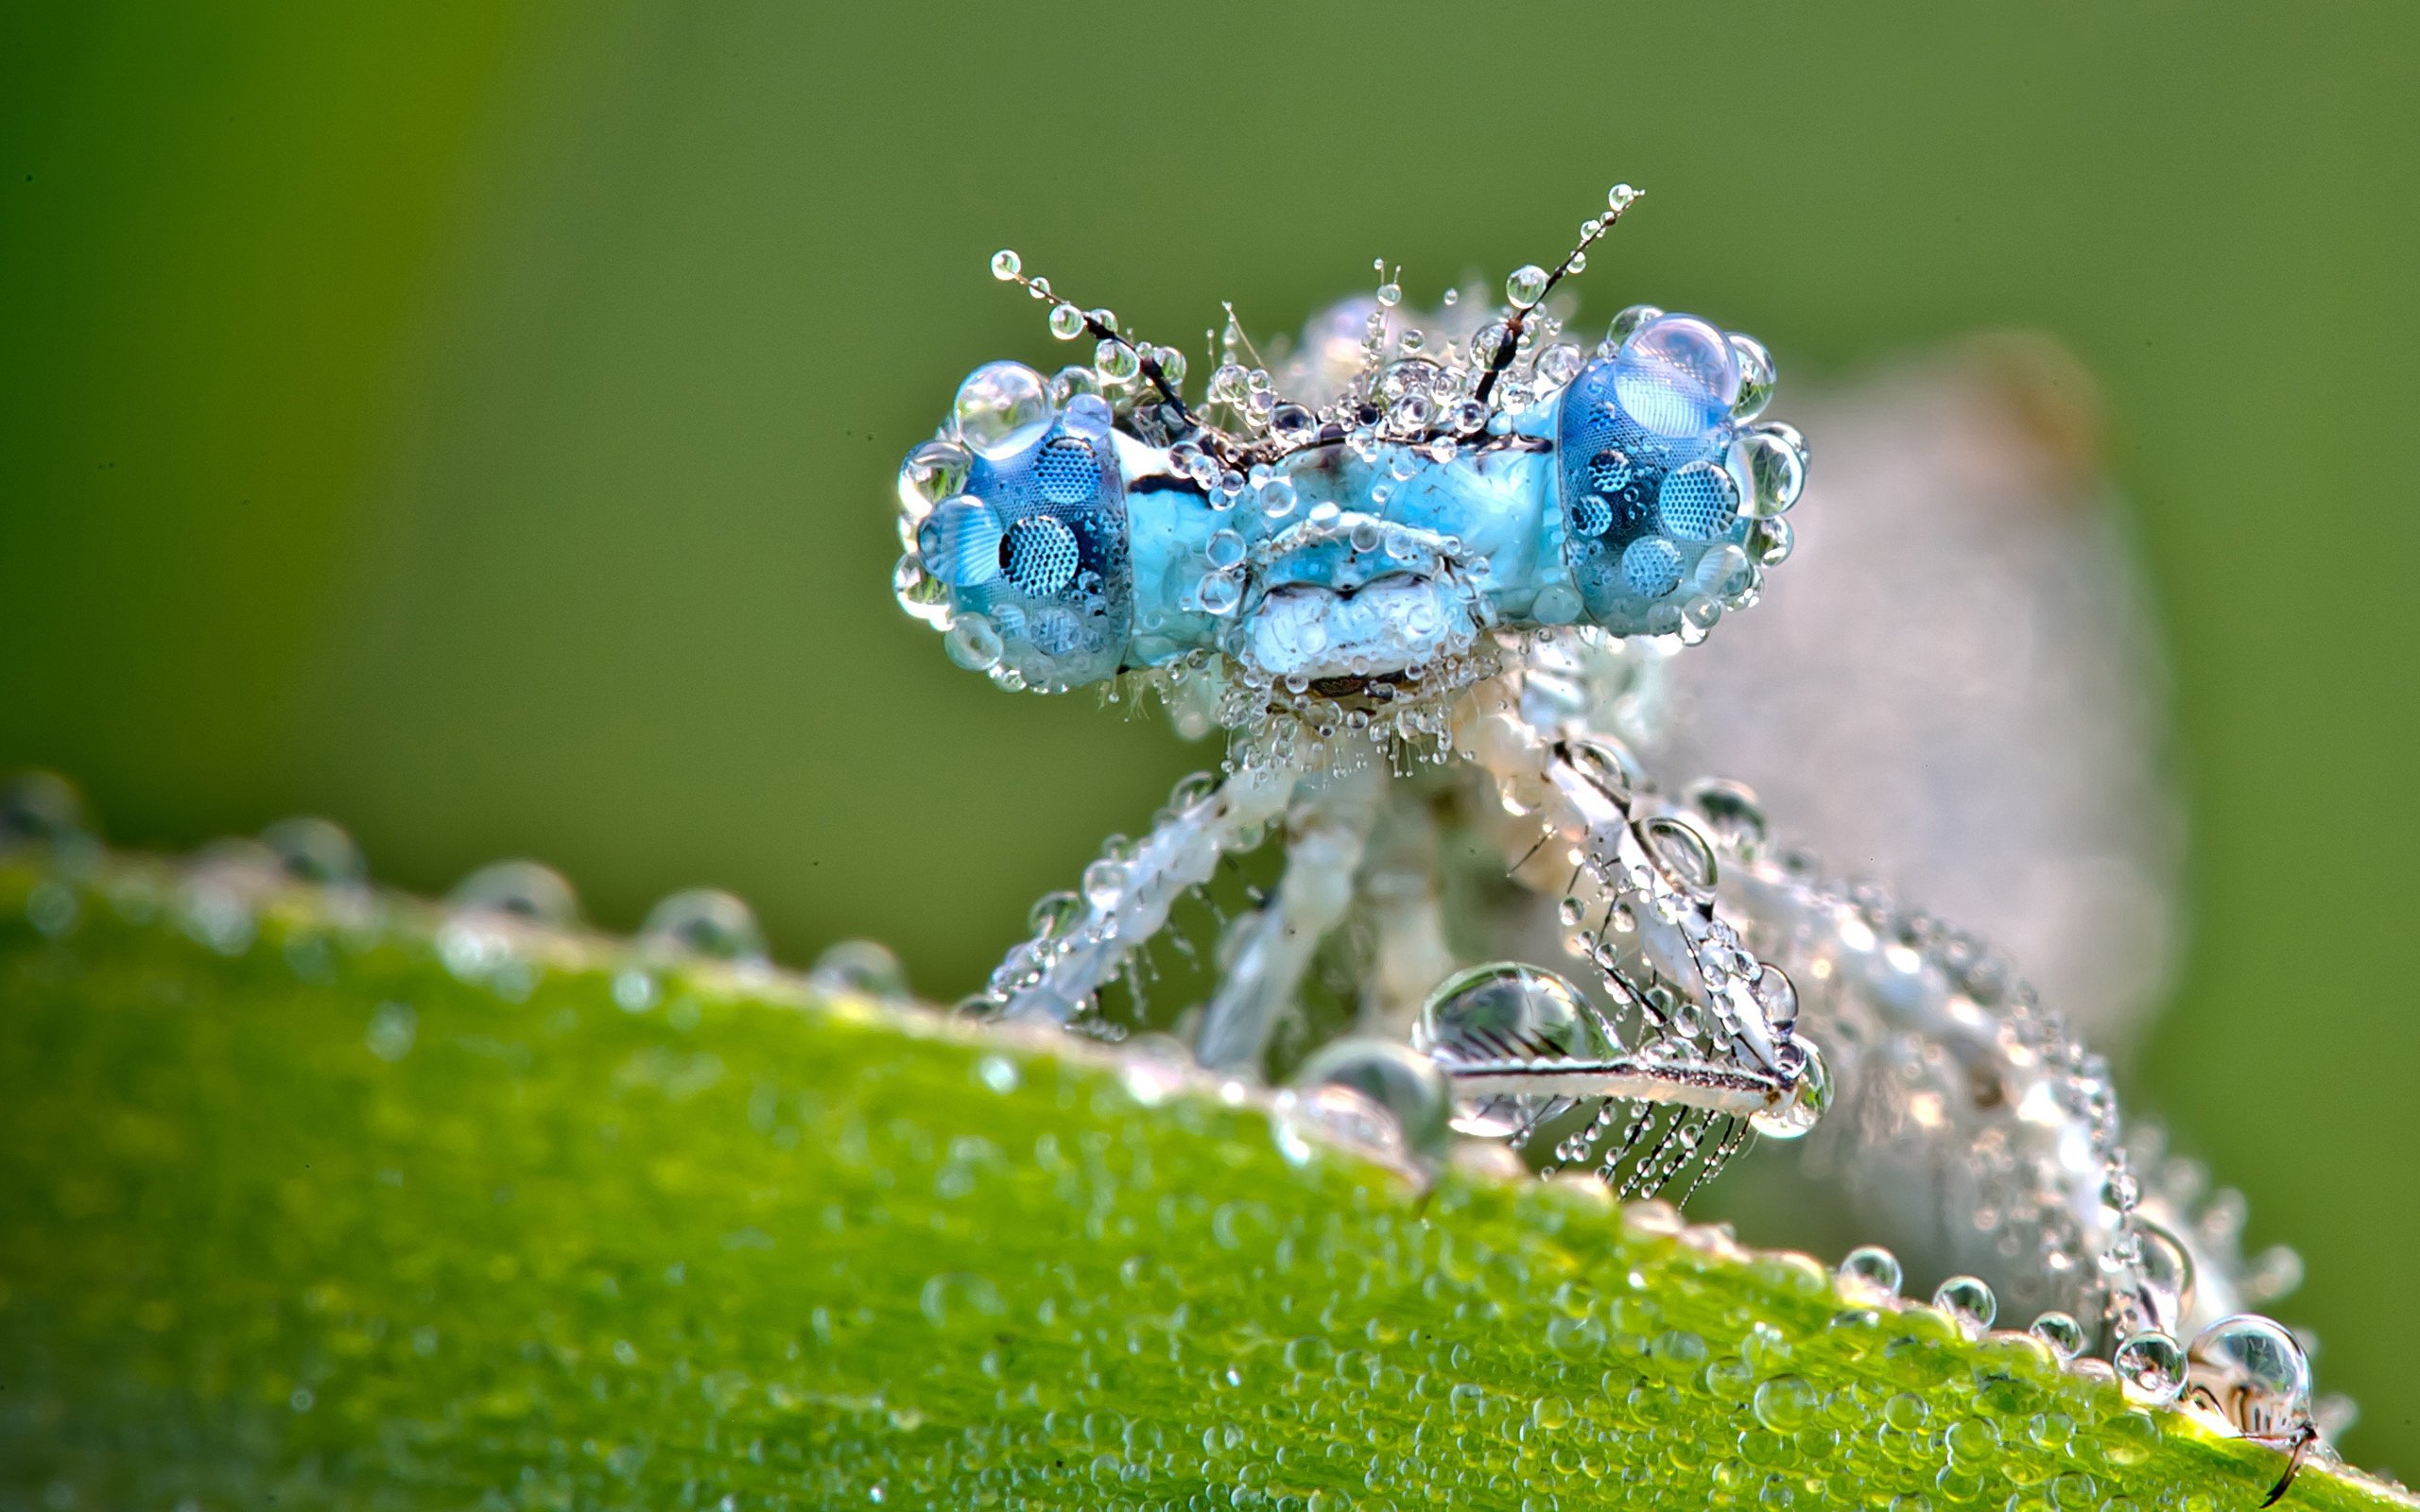 dragonfly_and_dew_drops-wide.jpg